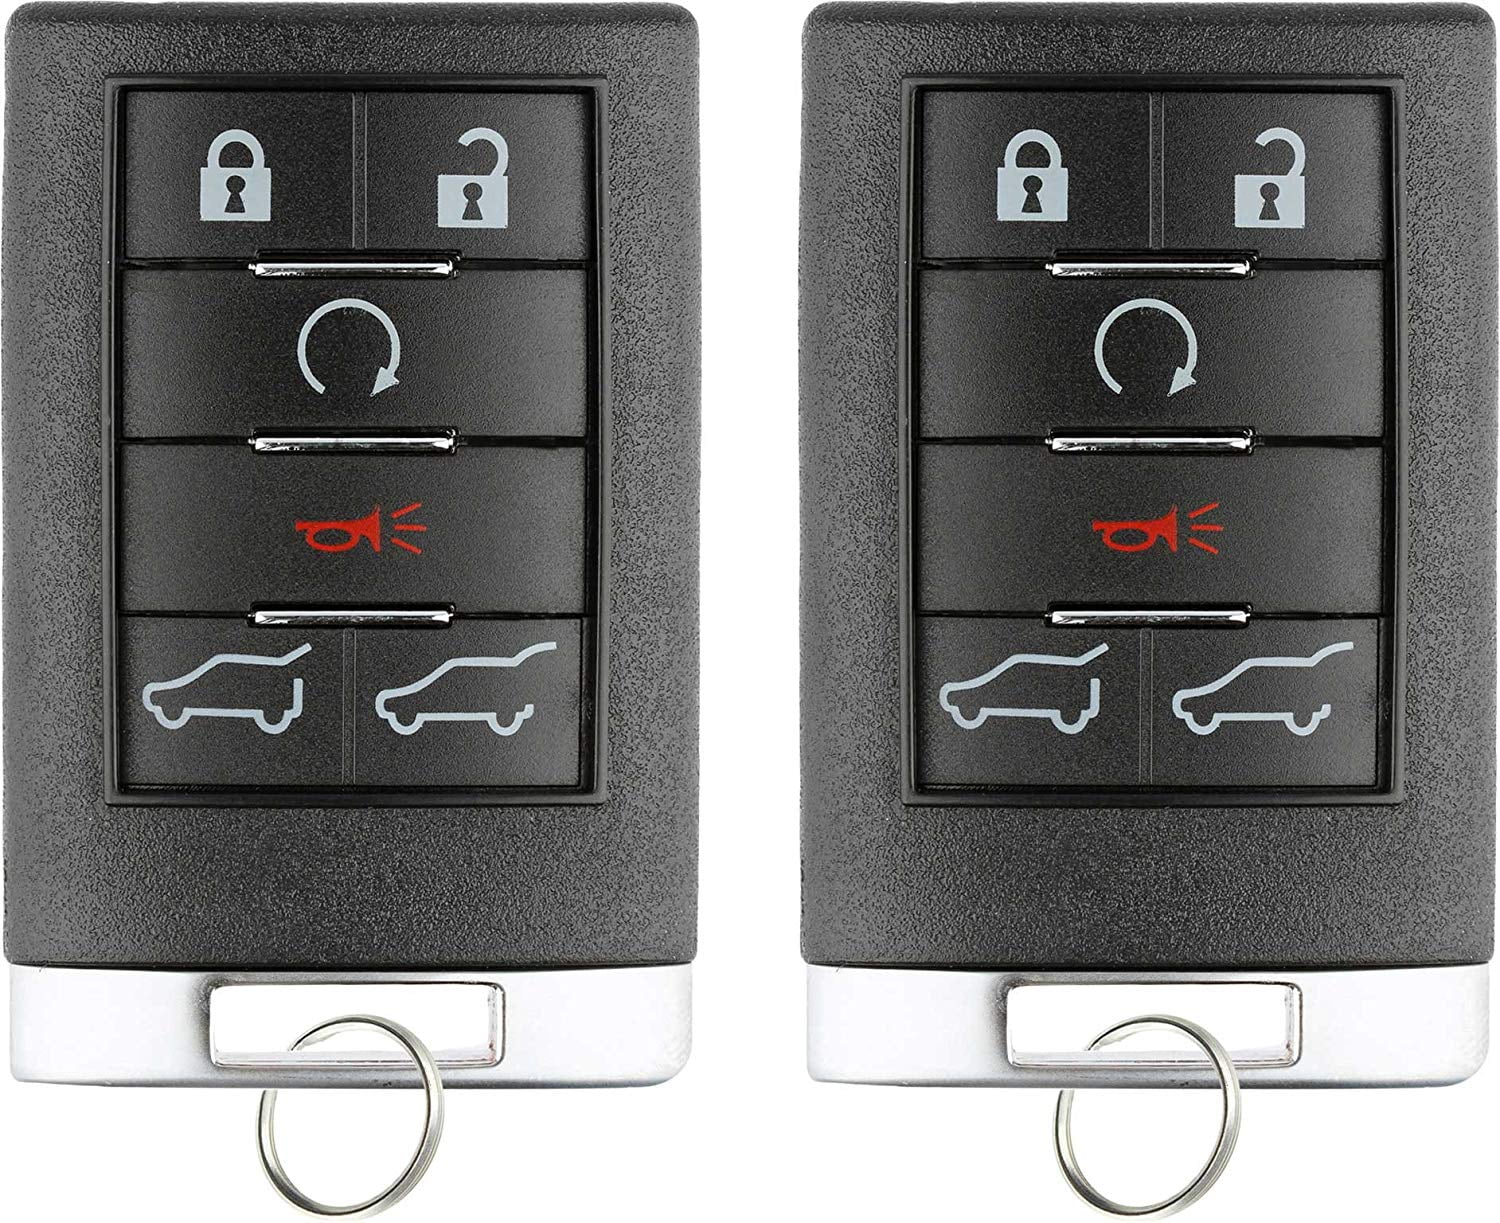 Pack of 2 KeylessOption Keyless Entry Remote Control Car Key Fob Replacement for M3N5WY8109 